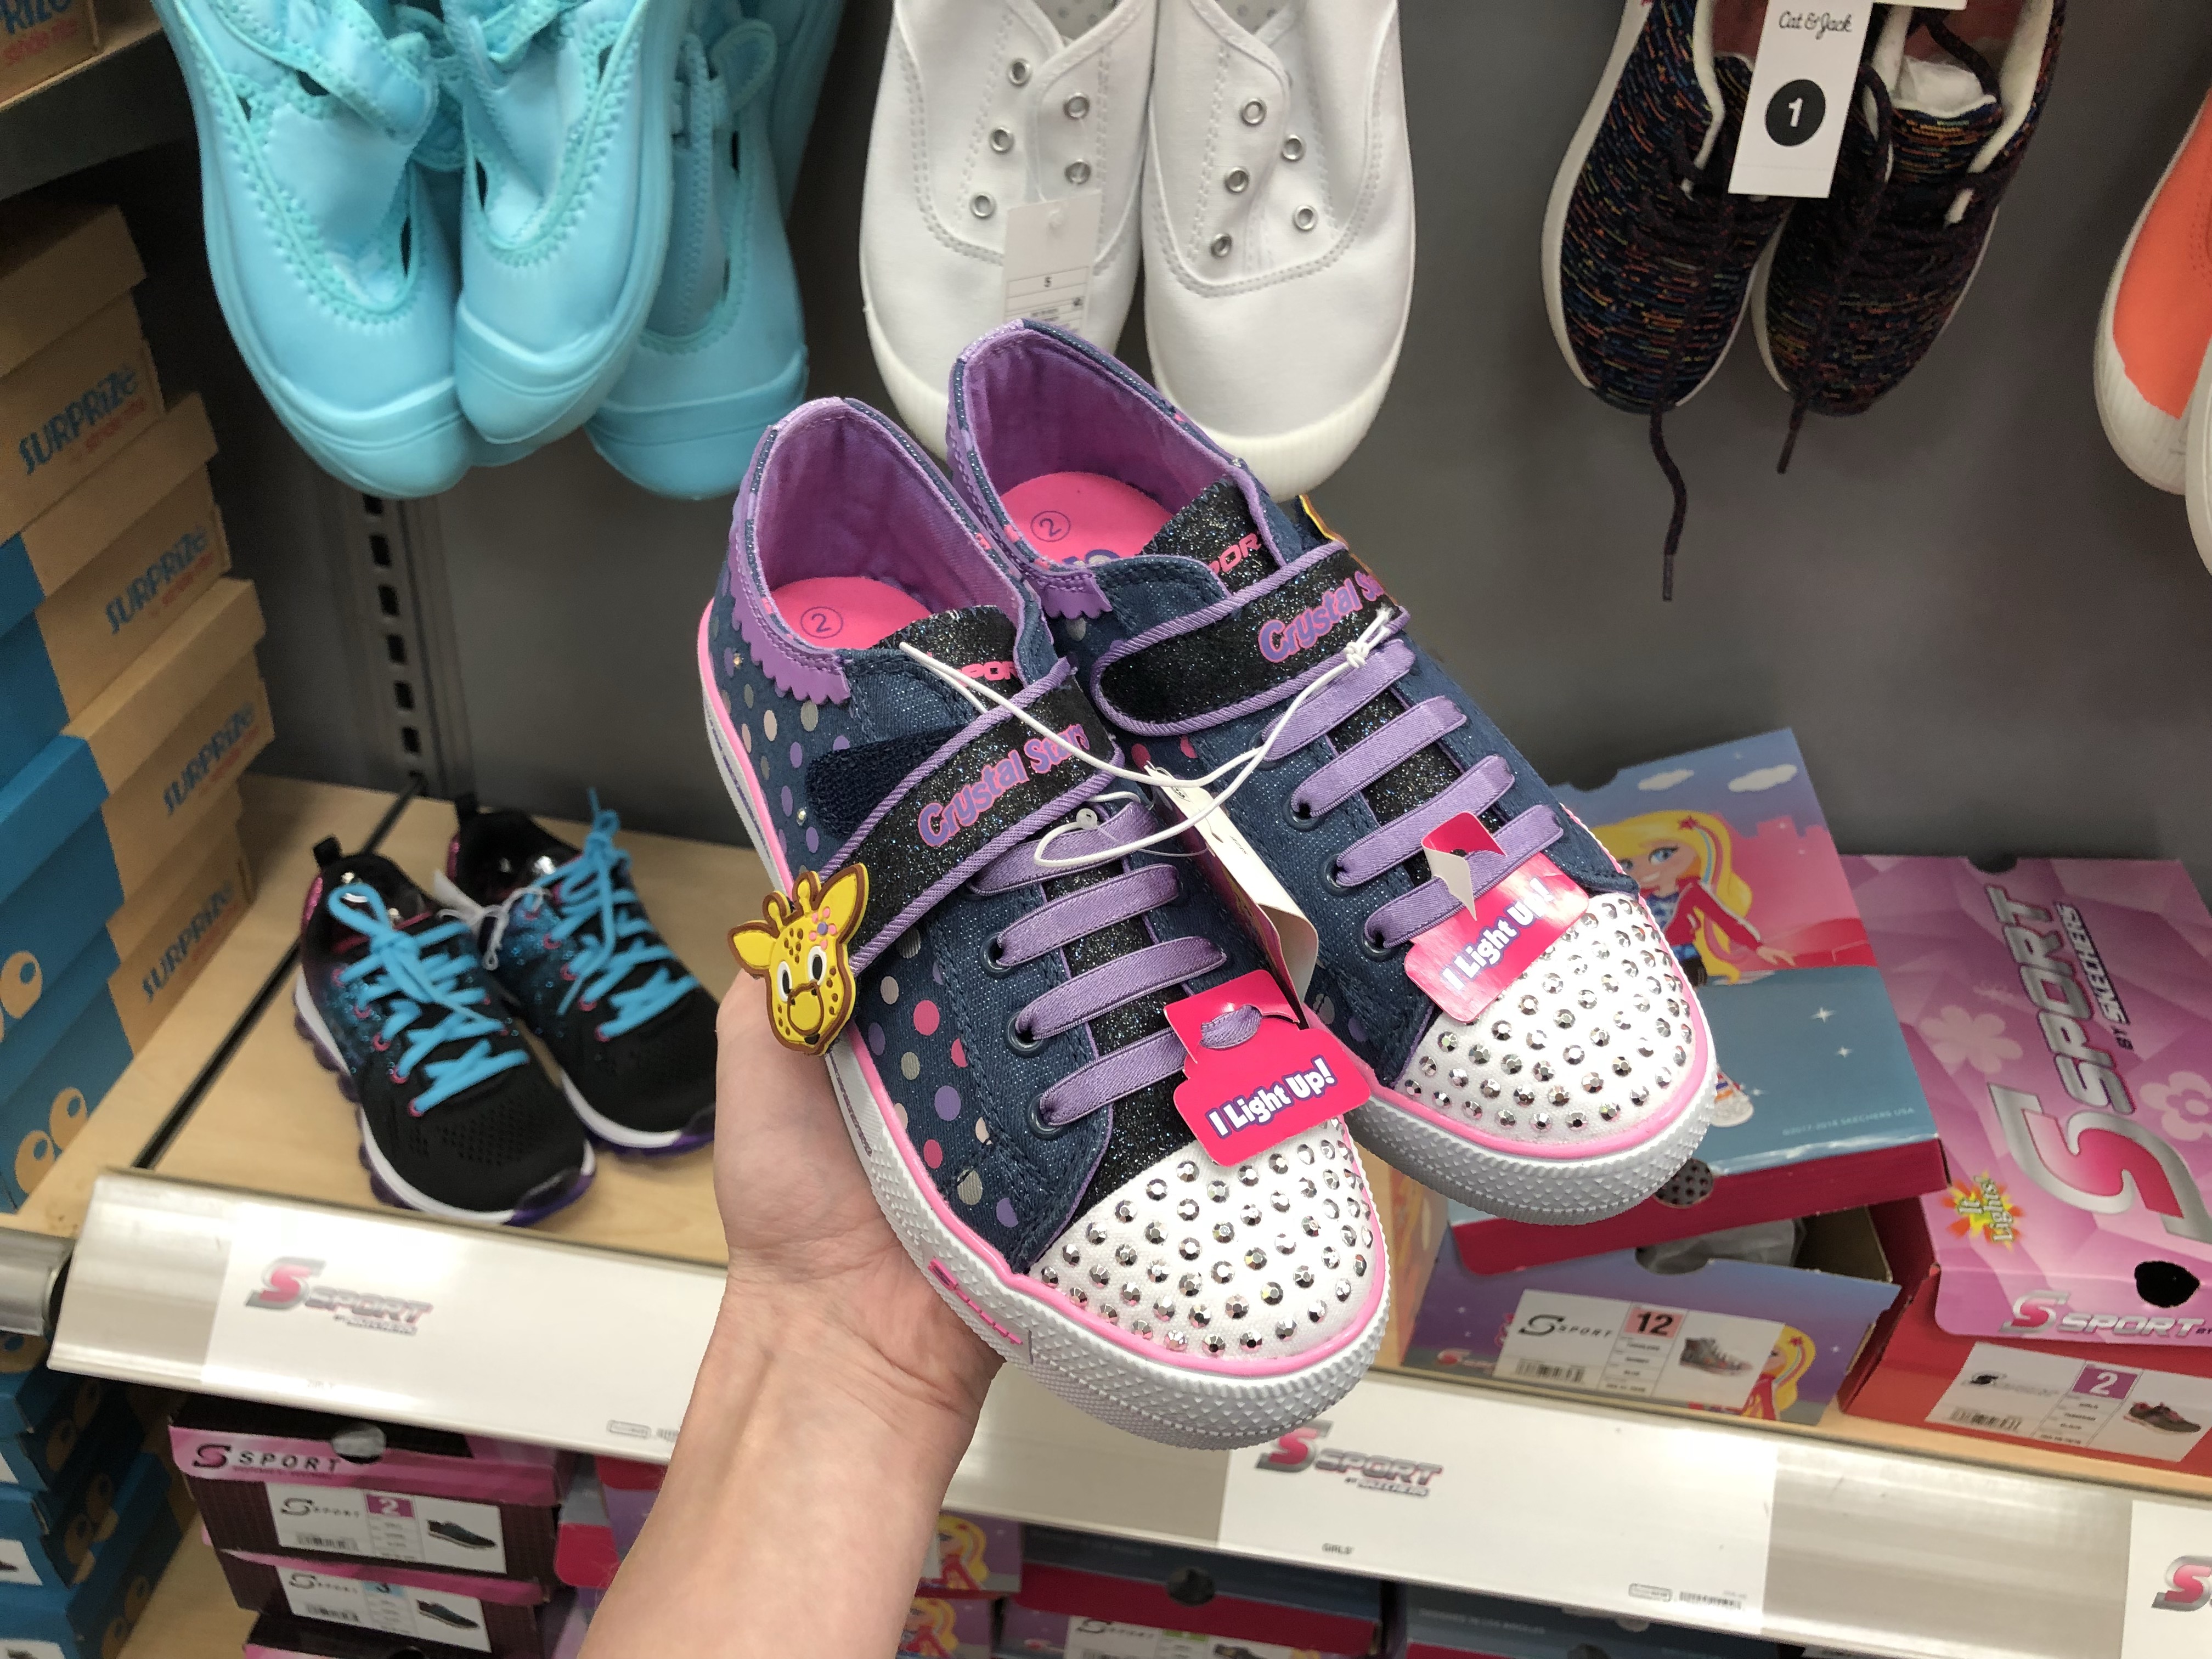 Marte Pólvora personal 30% Off Skechers Kids Shoes at Target (In-Store & Online)